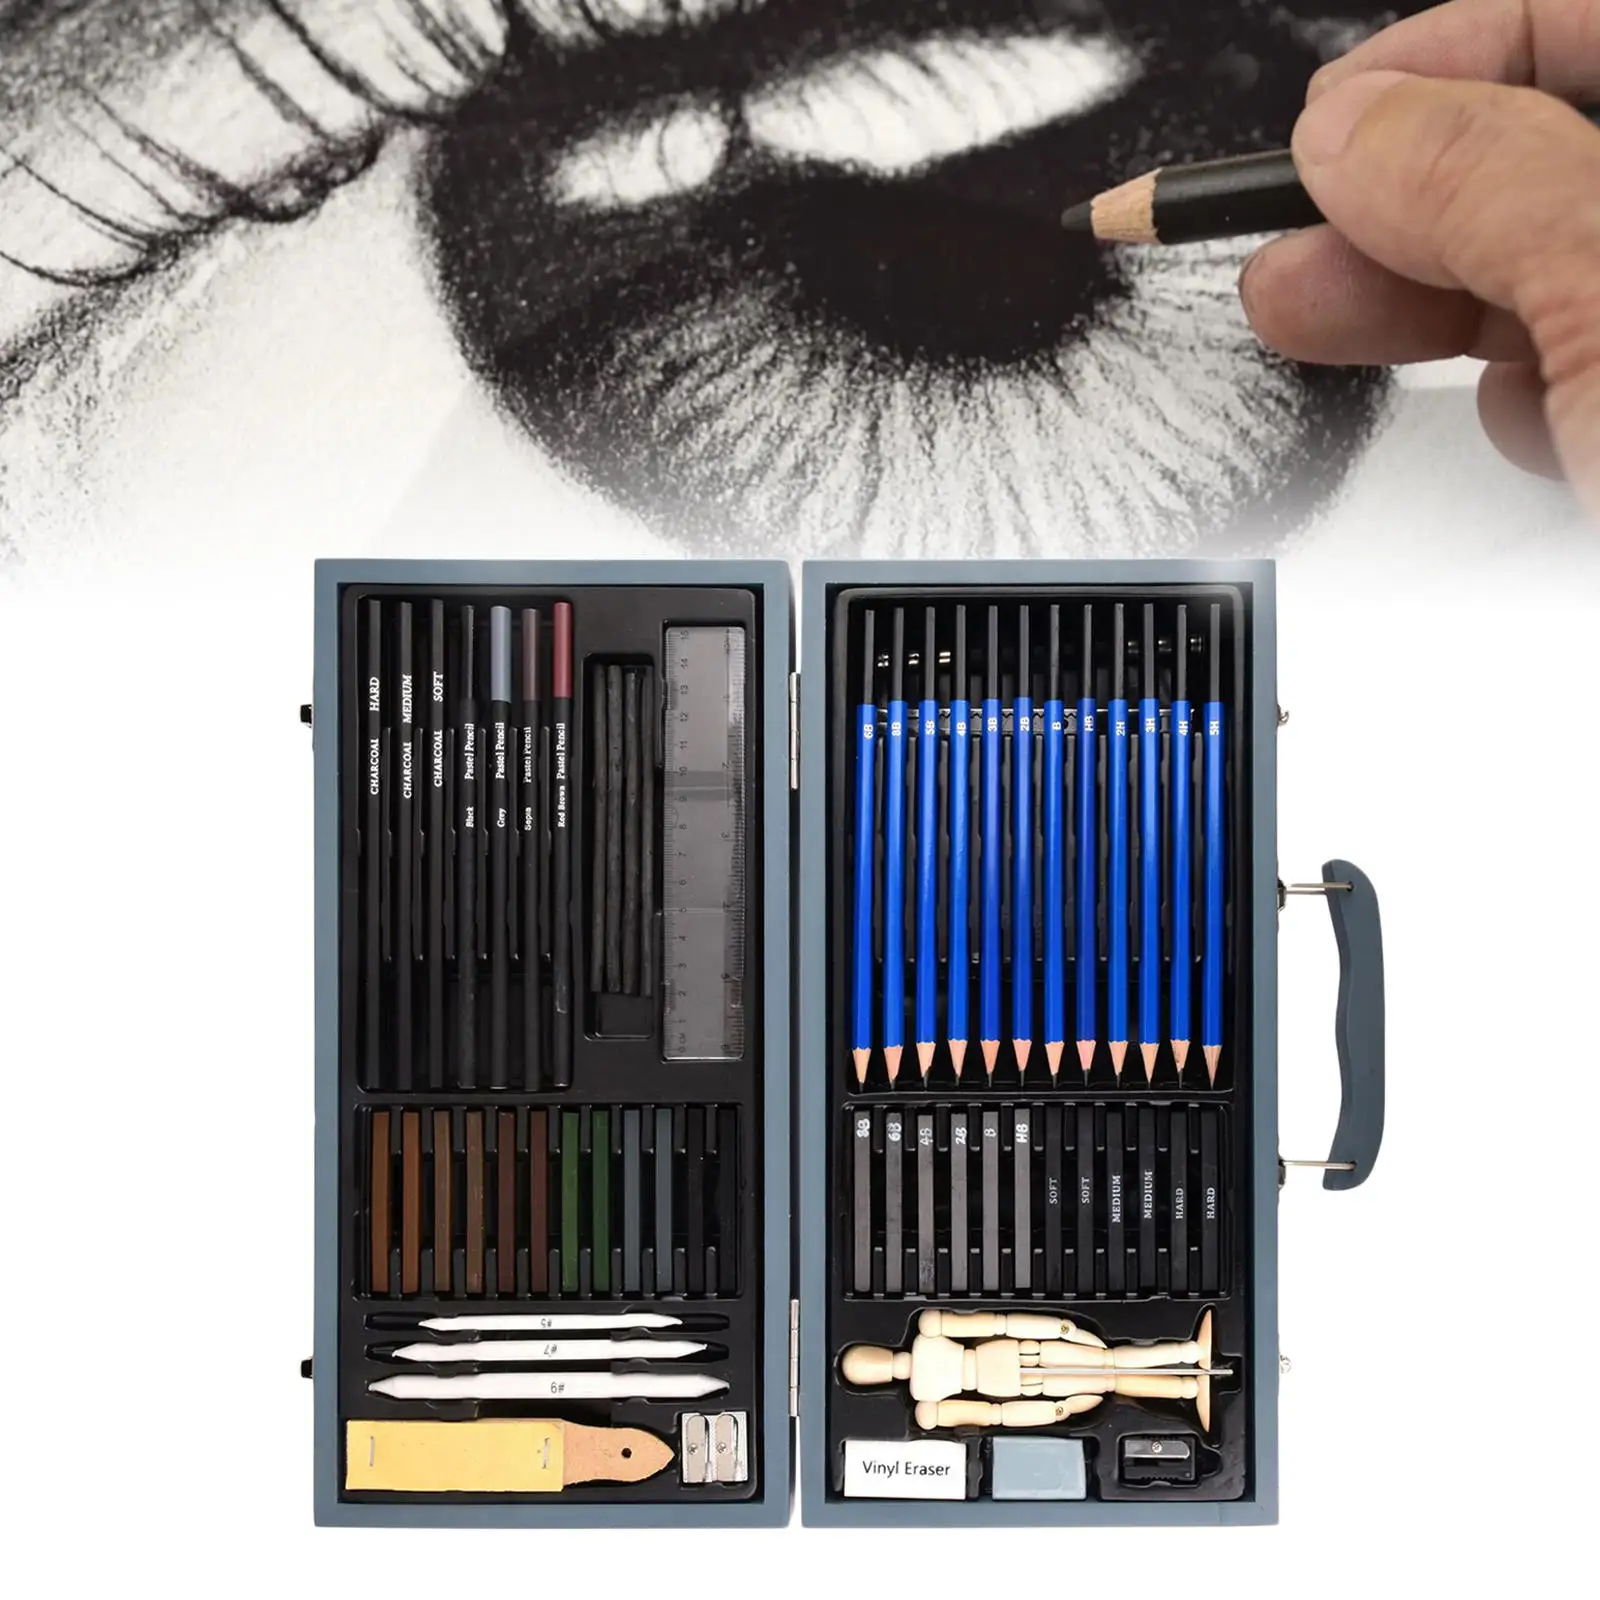 60 Sketching Pencil Set Graphite Pencils Art Tools Charcoal Sketch Kit School Supplies Painting Kit for Beginners Artist Student